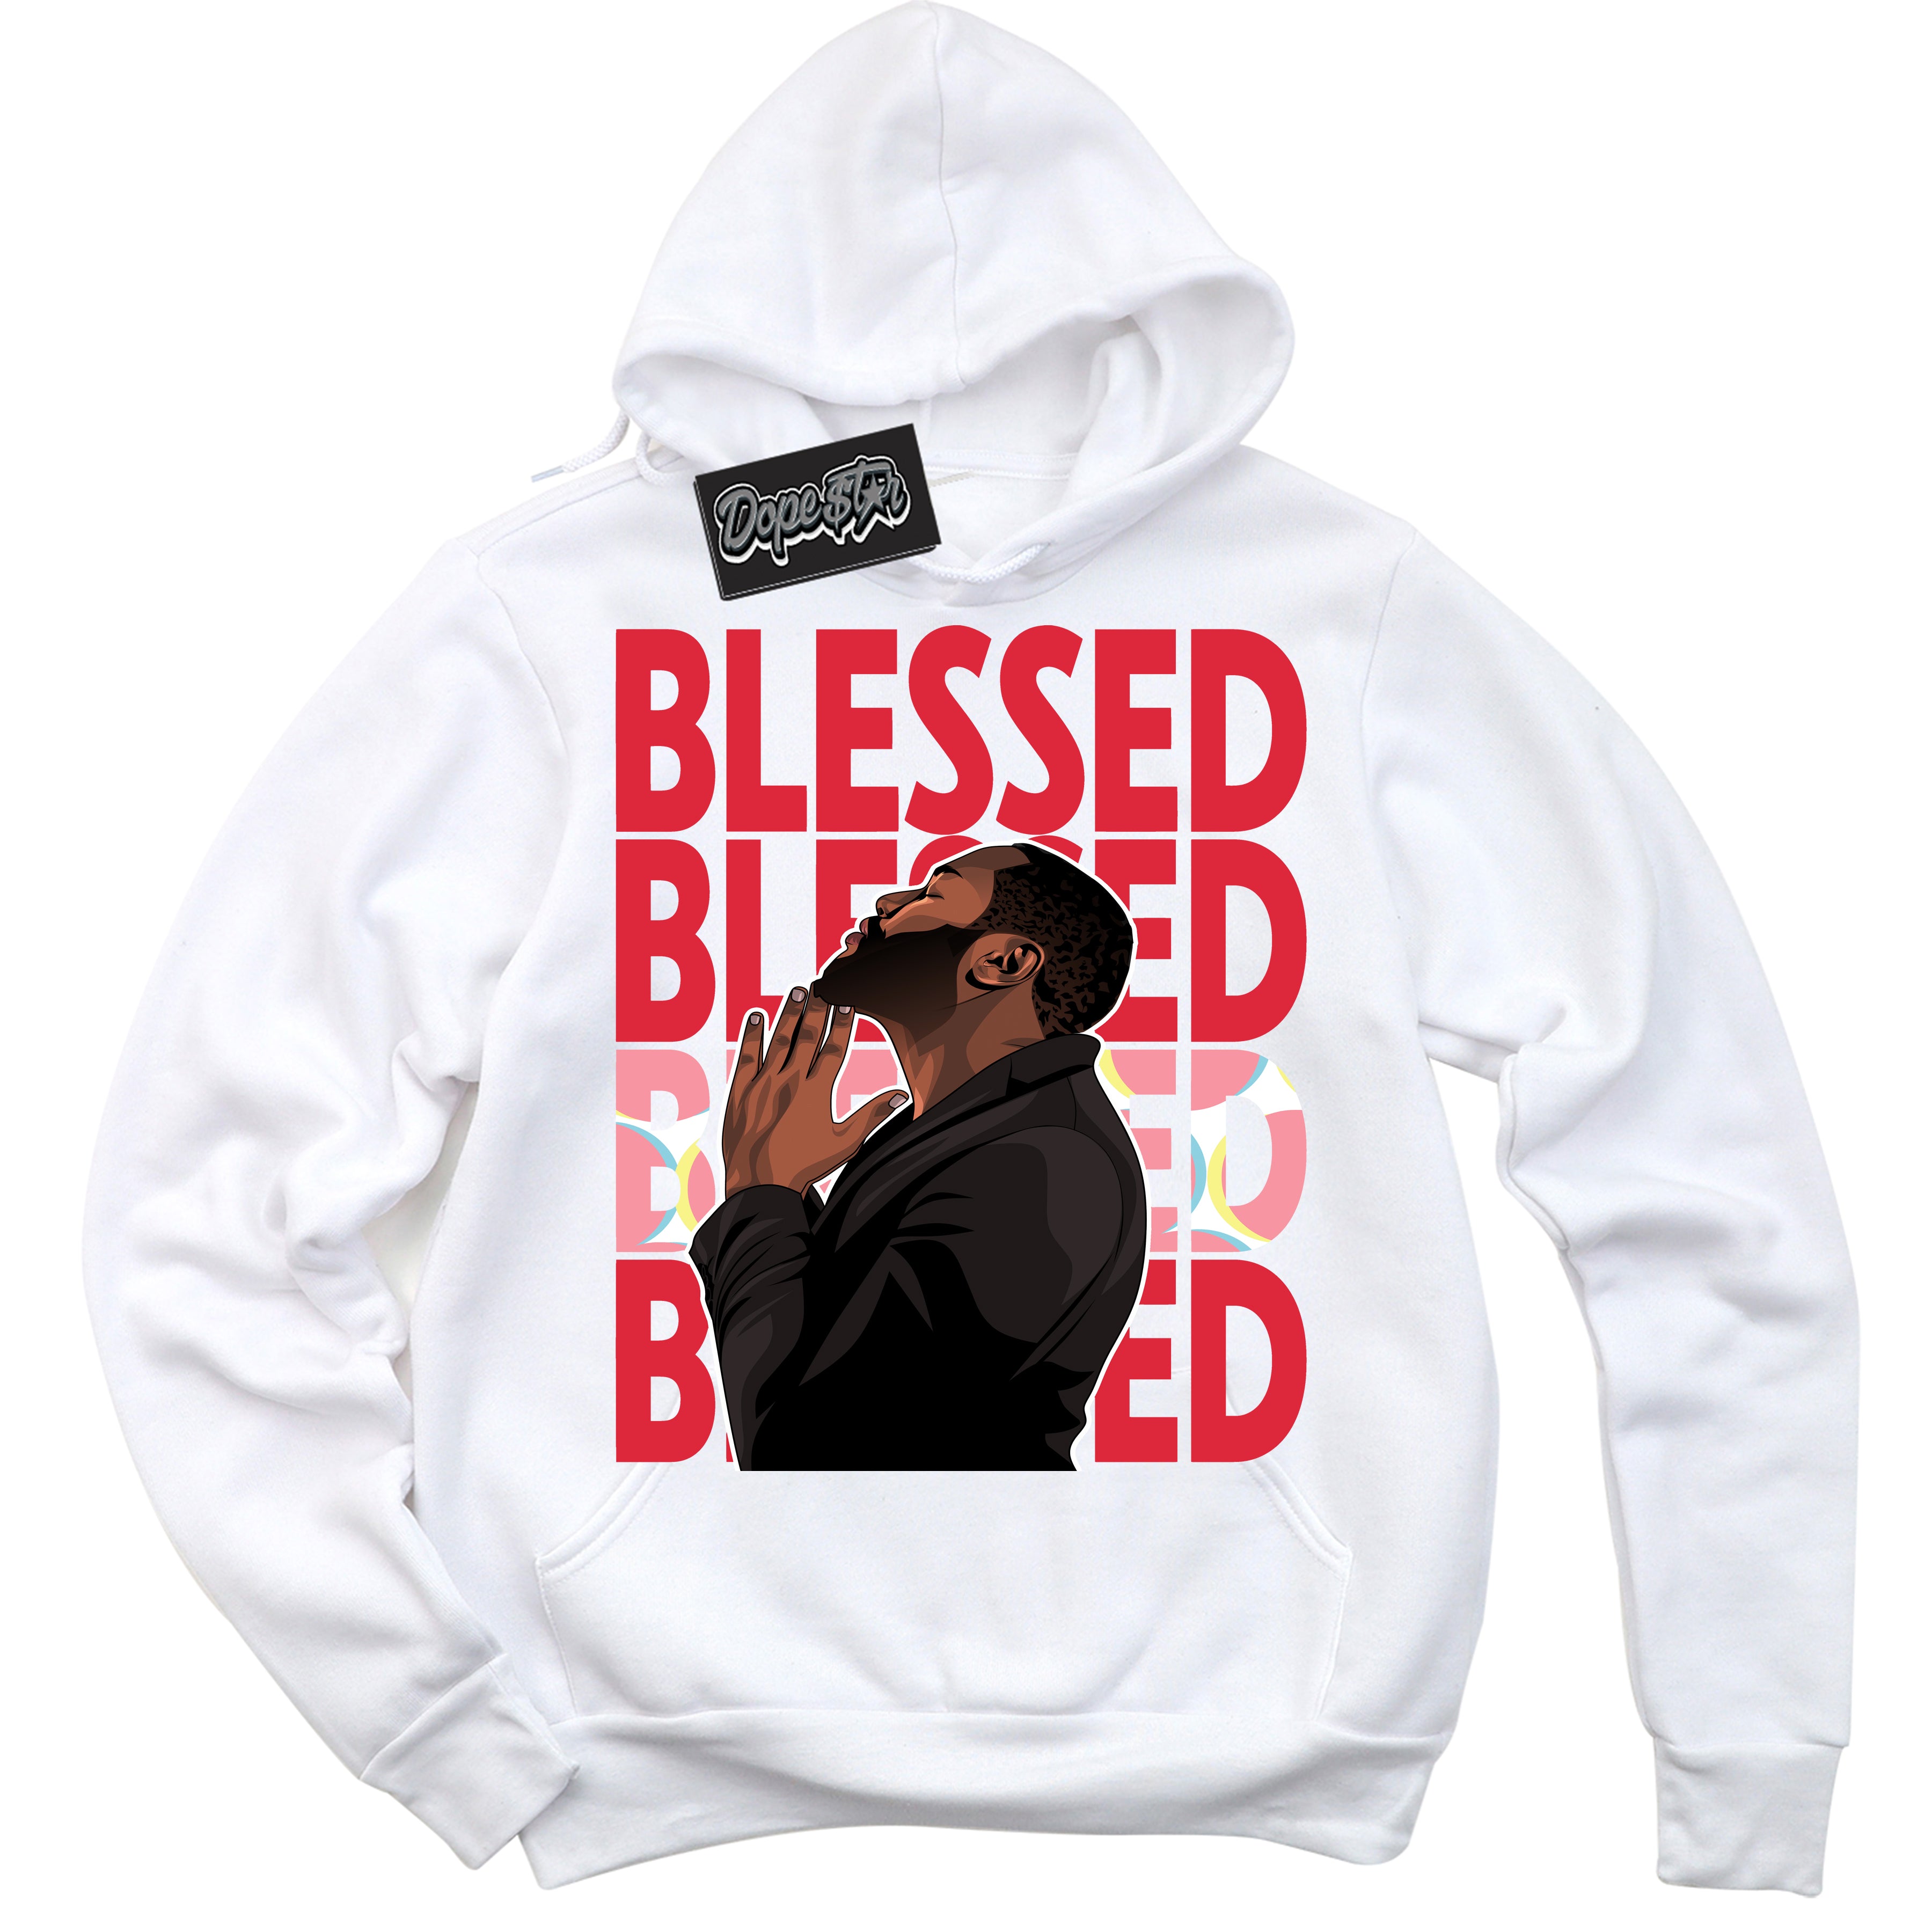 Cool White Graphic DopeStar Hoodie with “ God Blessed “ print, that perfectly matches Spider-Verse 1s sneakers